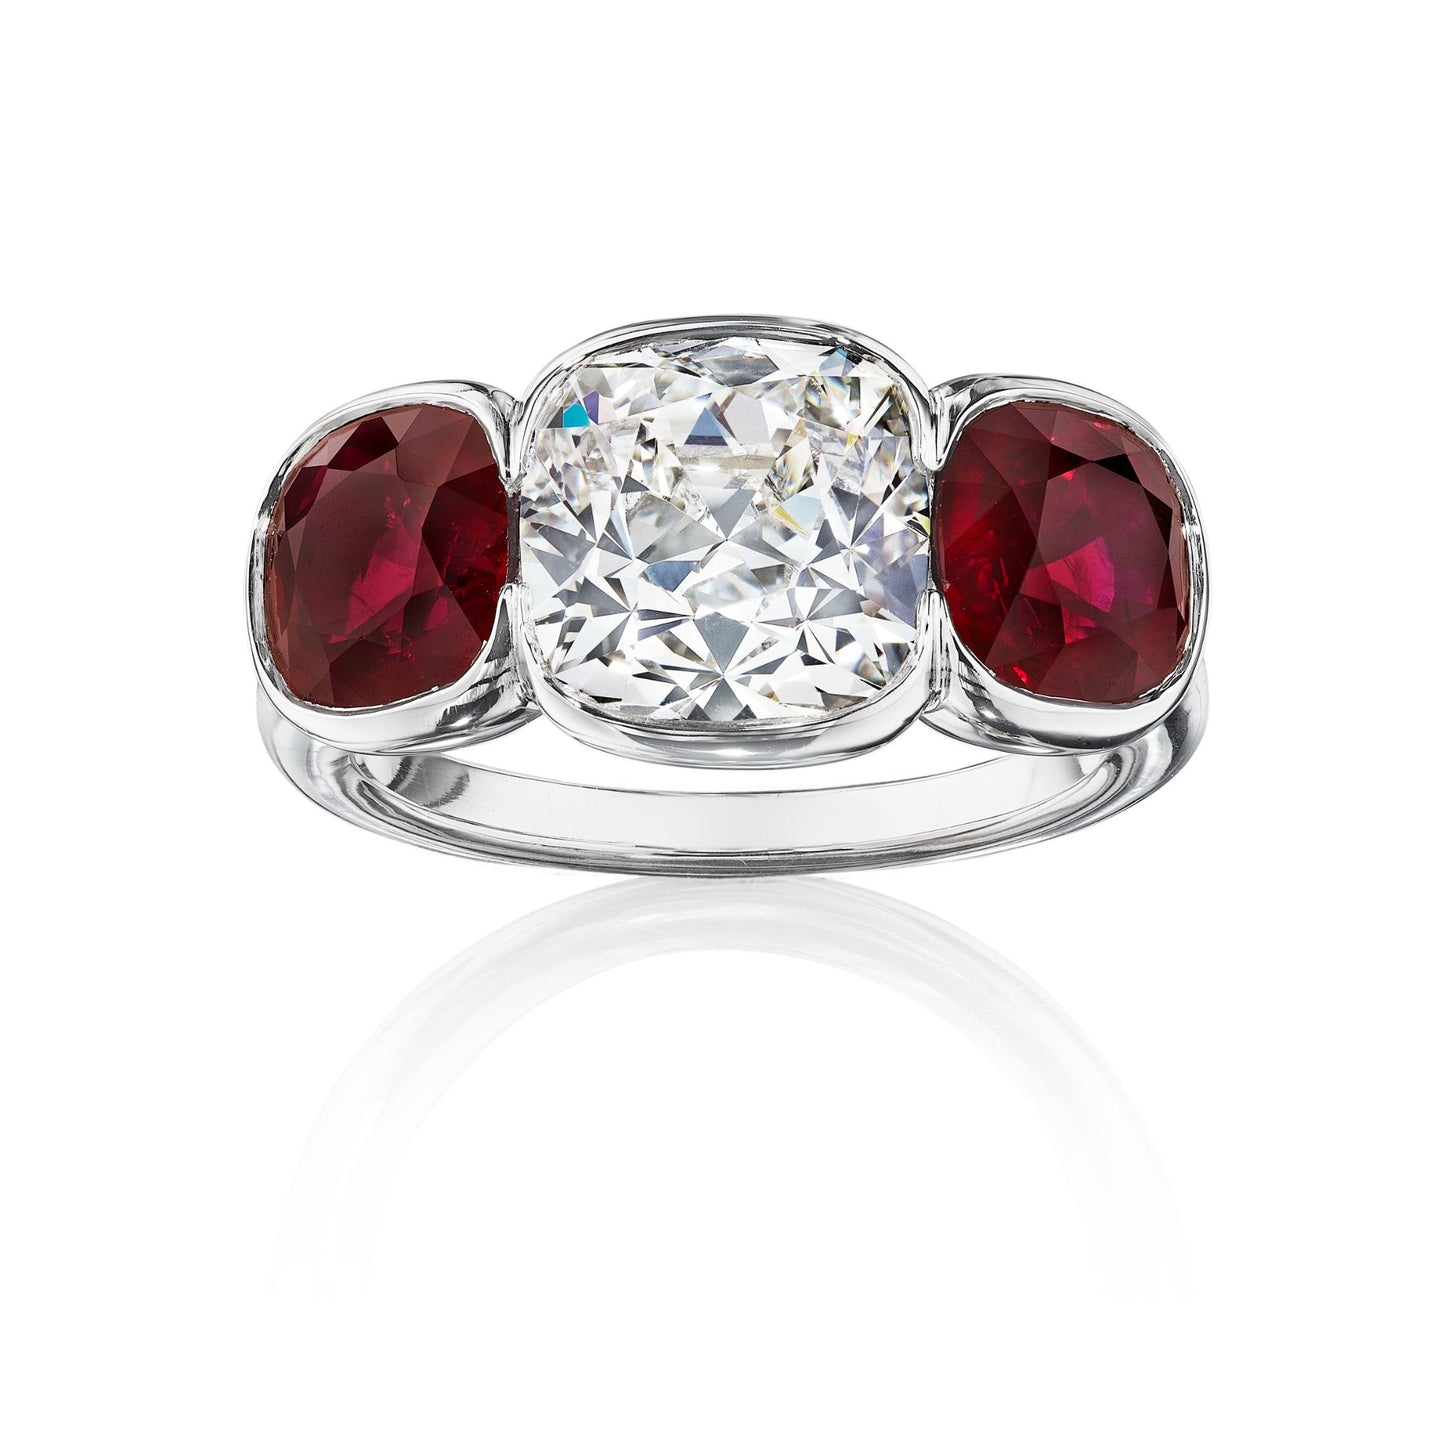 PLATINUM DIAMOND AND RUBY RING BY SIEGELSON, NEW YORK